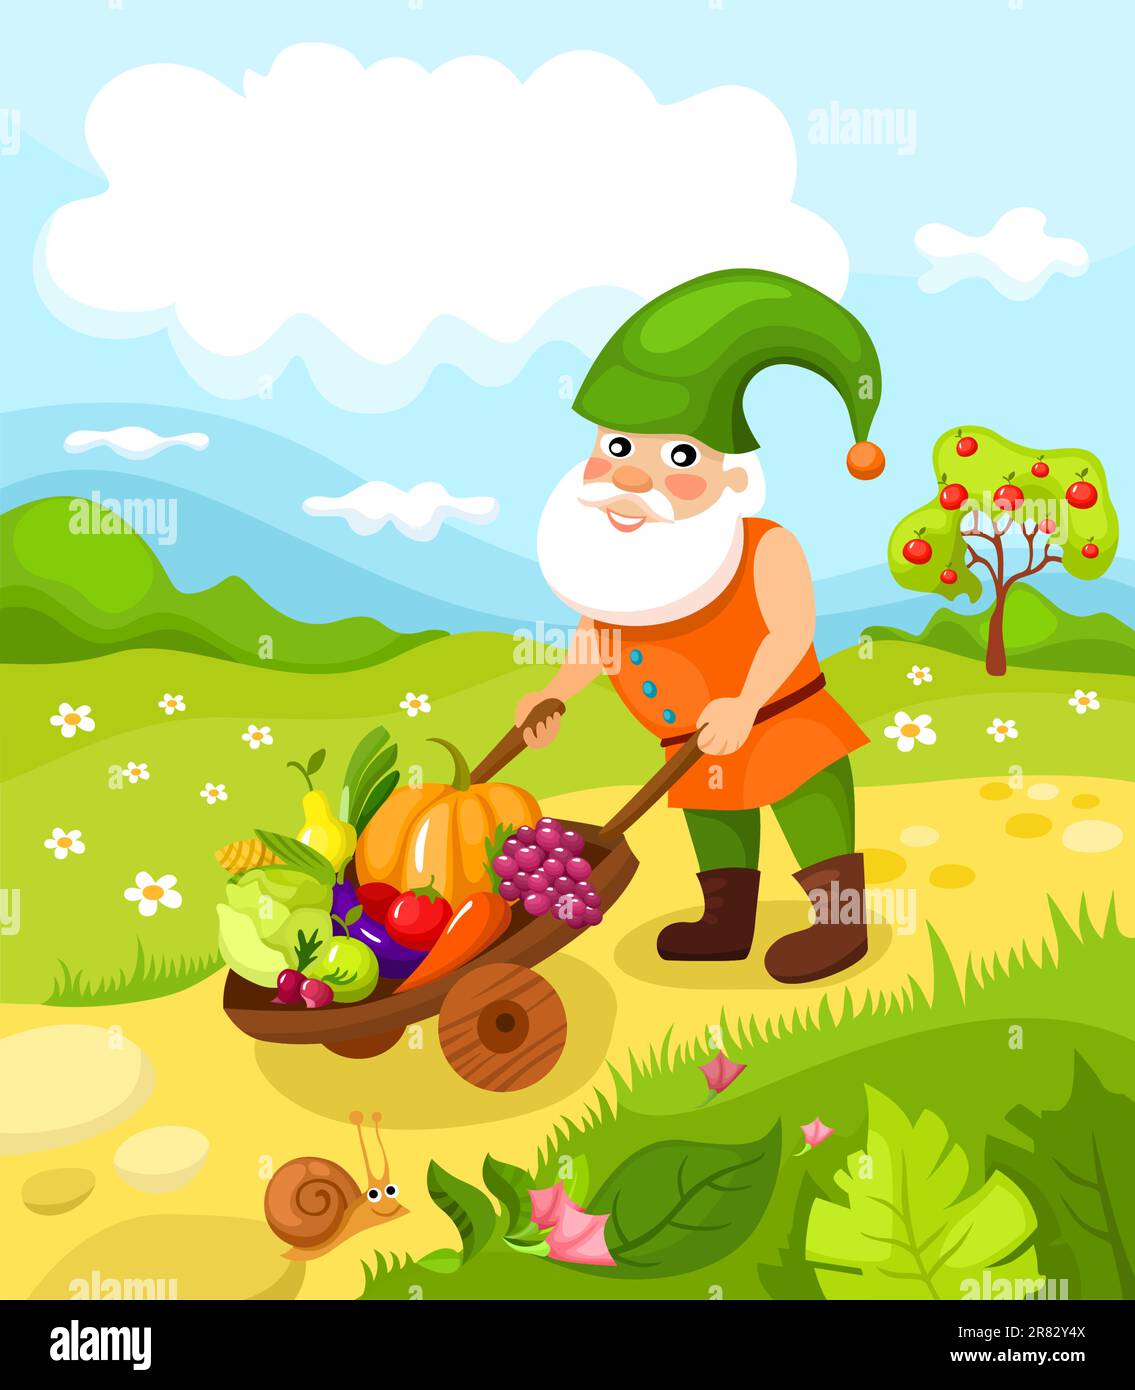 vector illustration of a cute dwarf Stock Vector